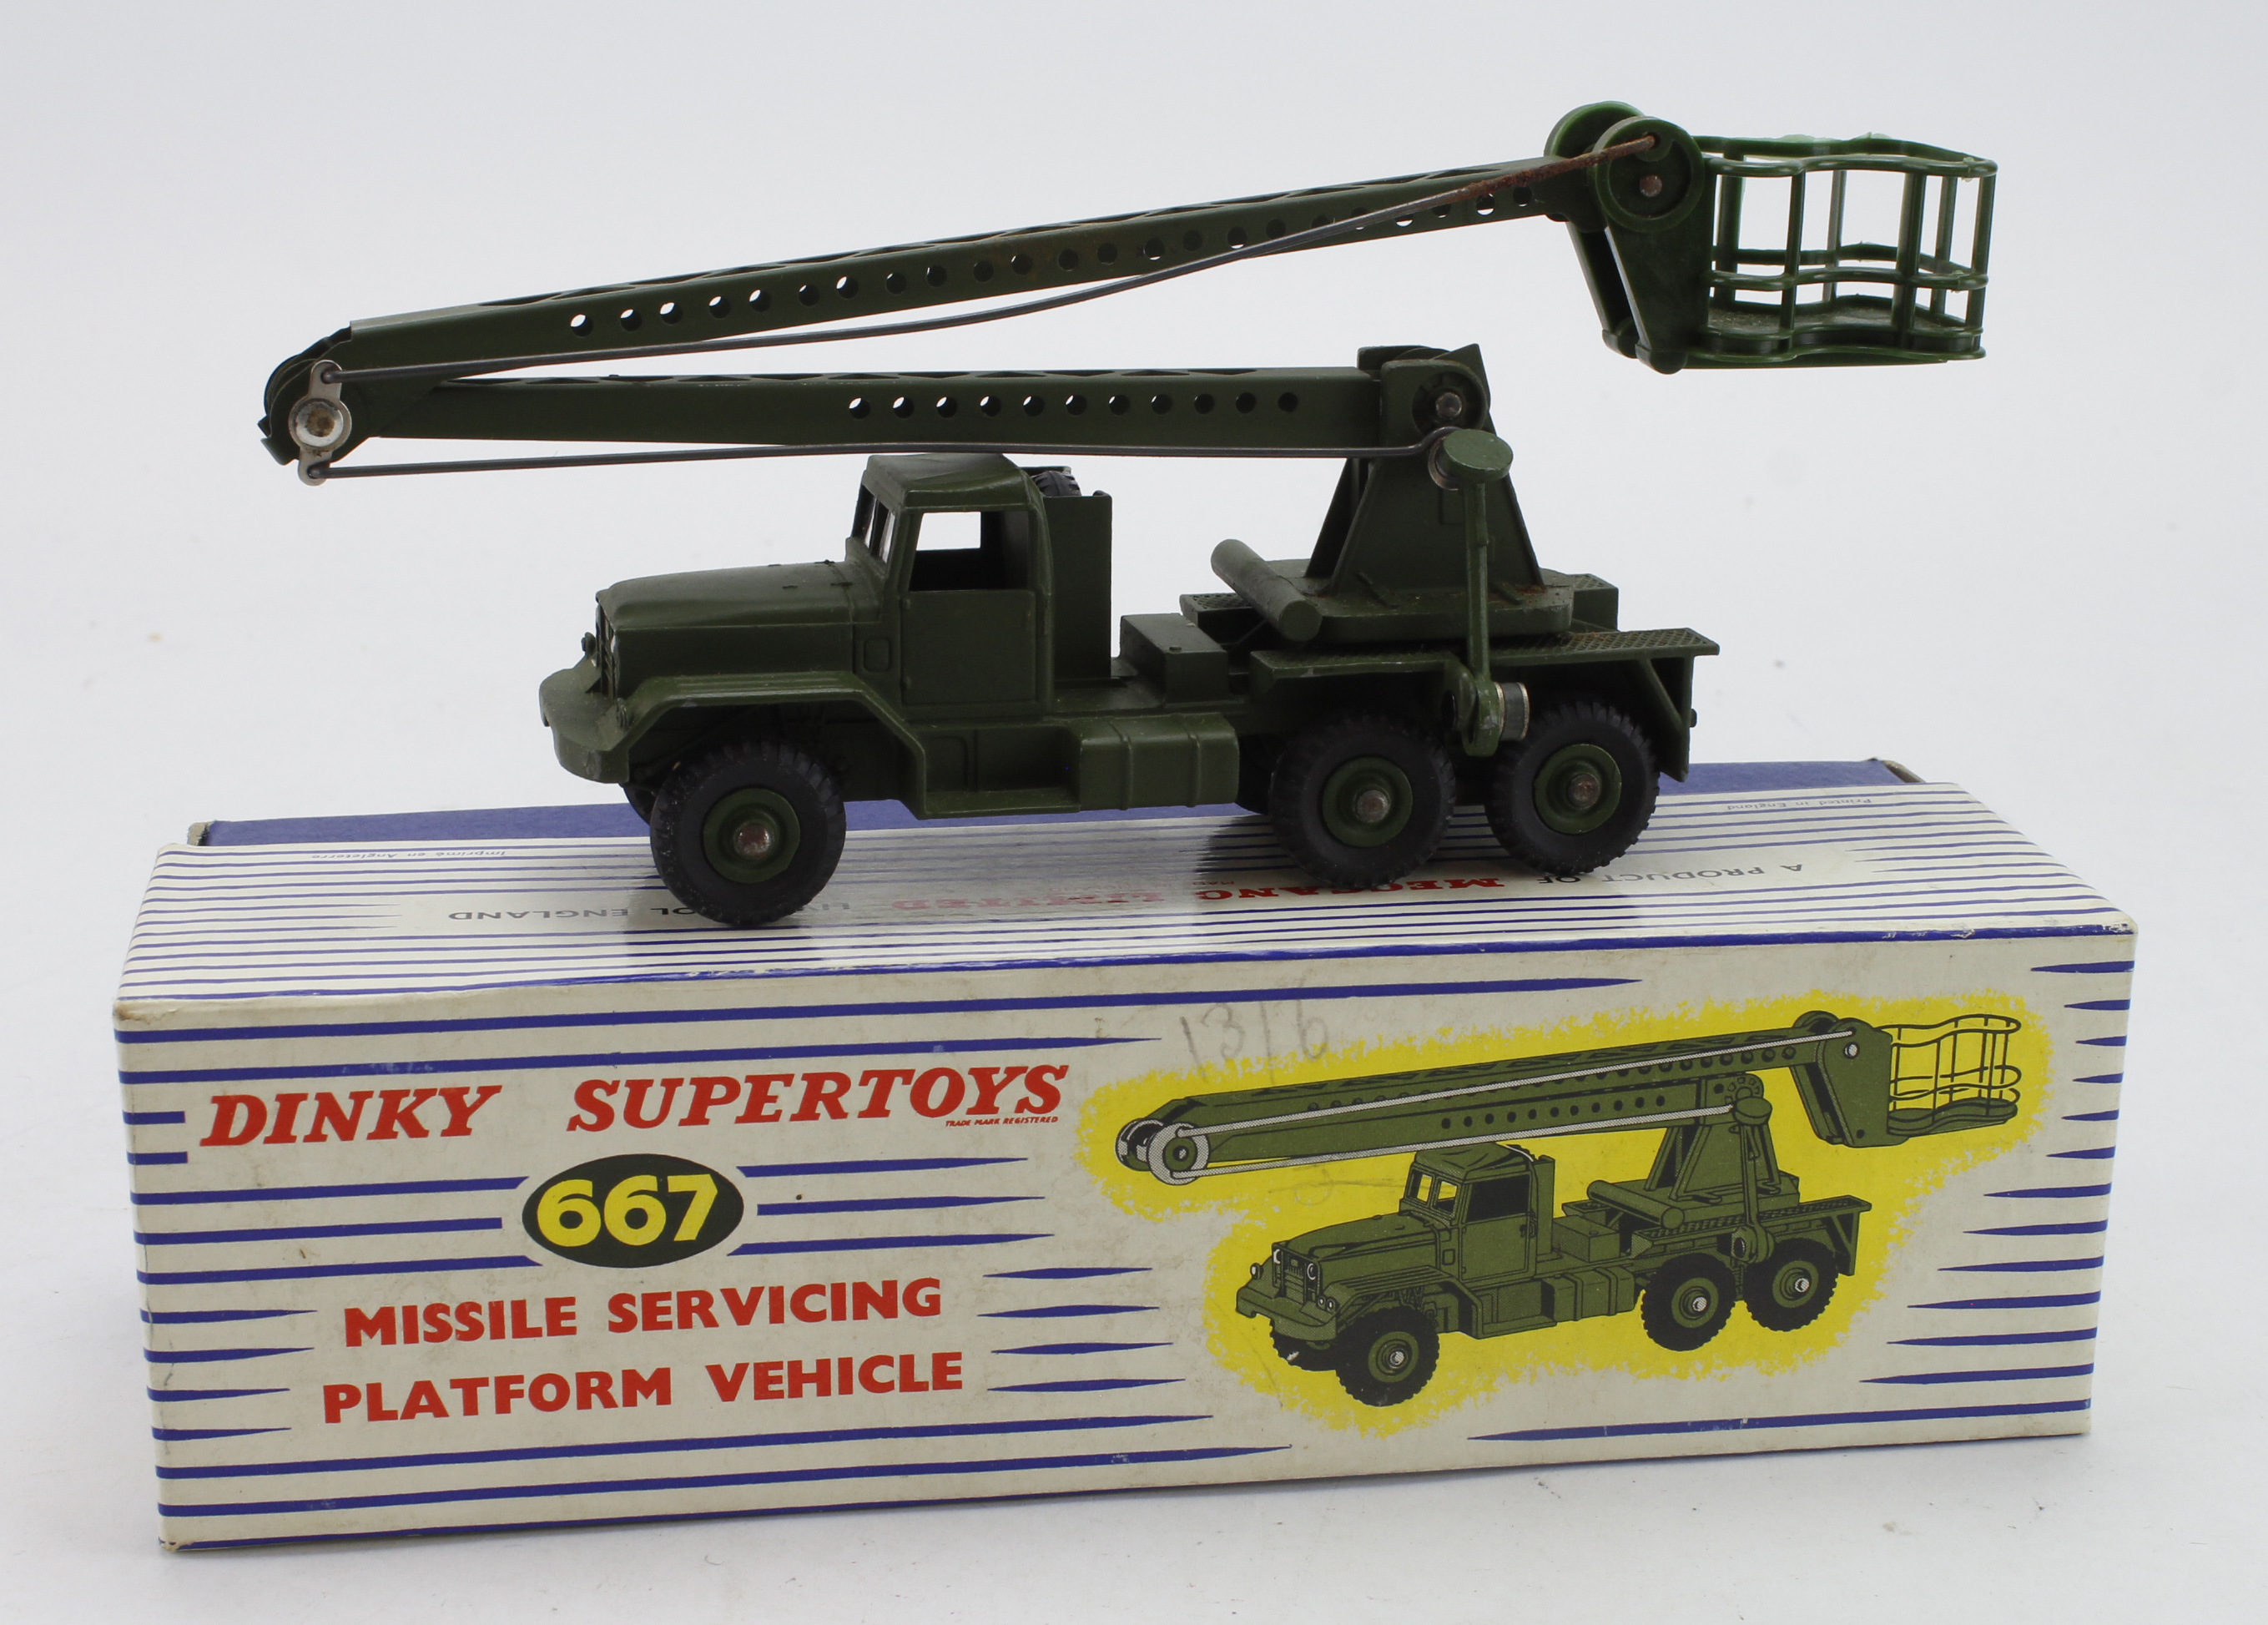 Dinky Supertoys, no. 667 'Missile Servicing Platform Vehicle', contained in original box